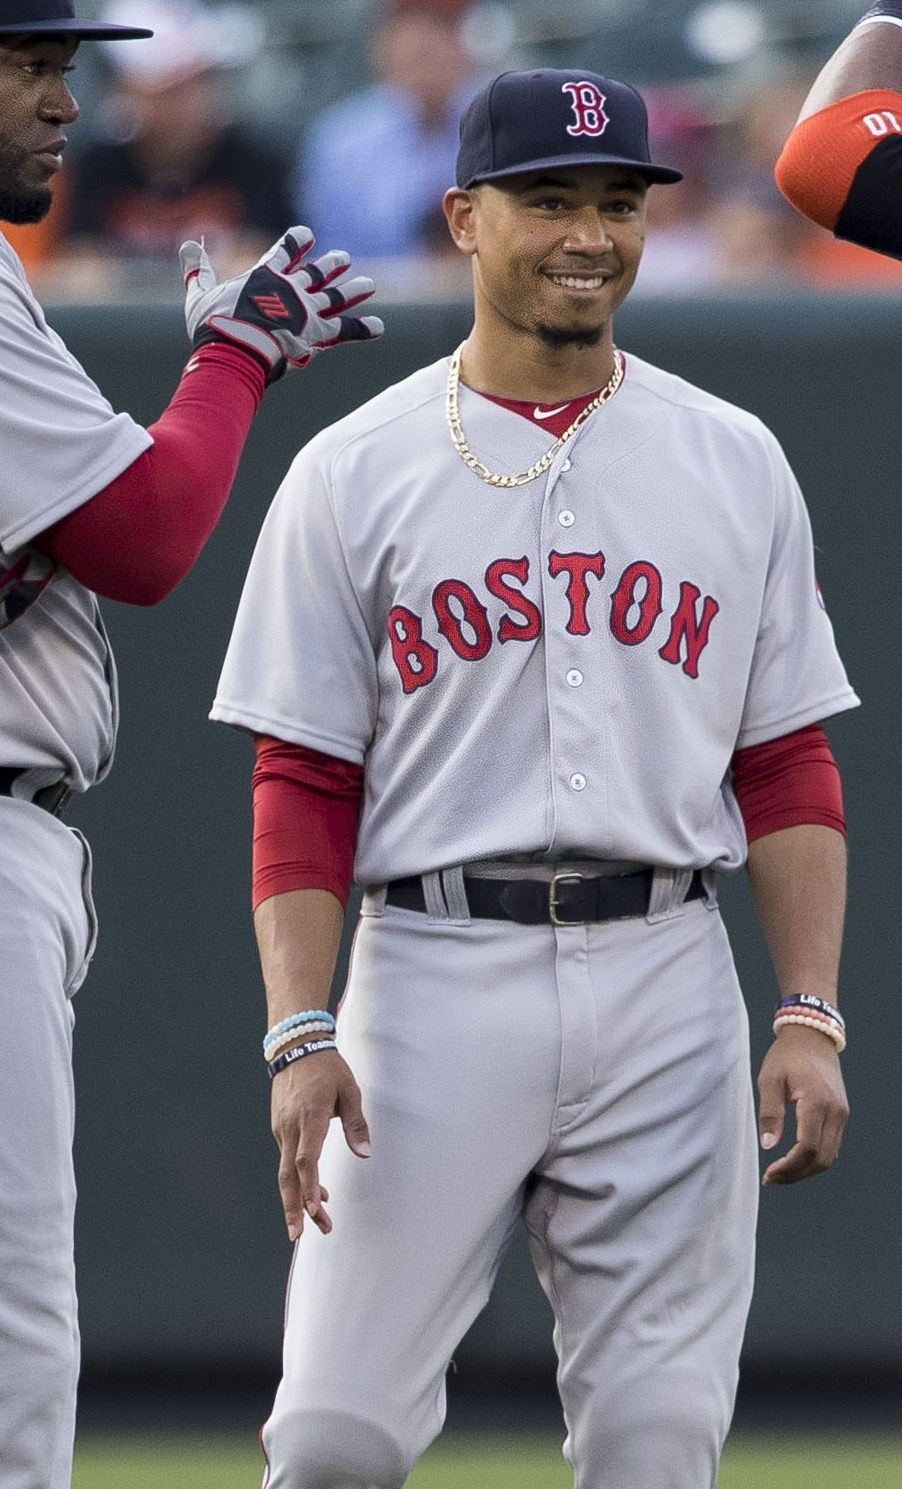 The Red Sox Mookie Betts chatting with teammates before a game